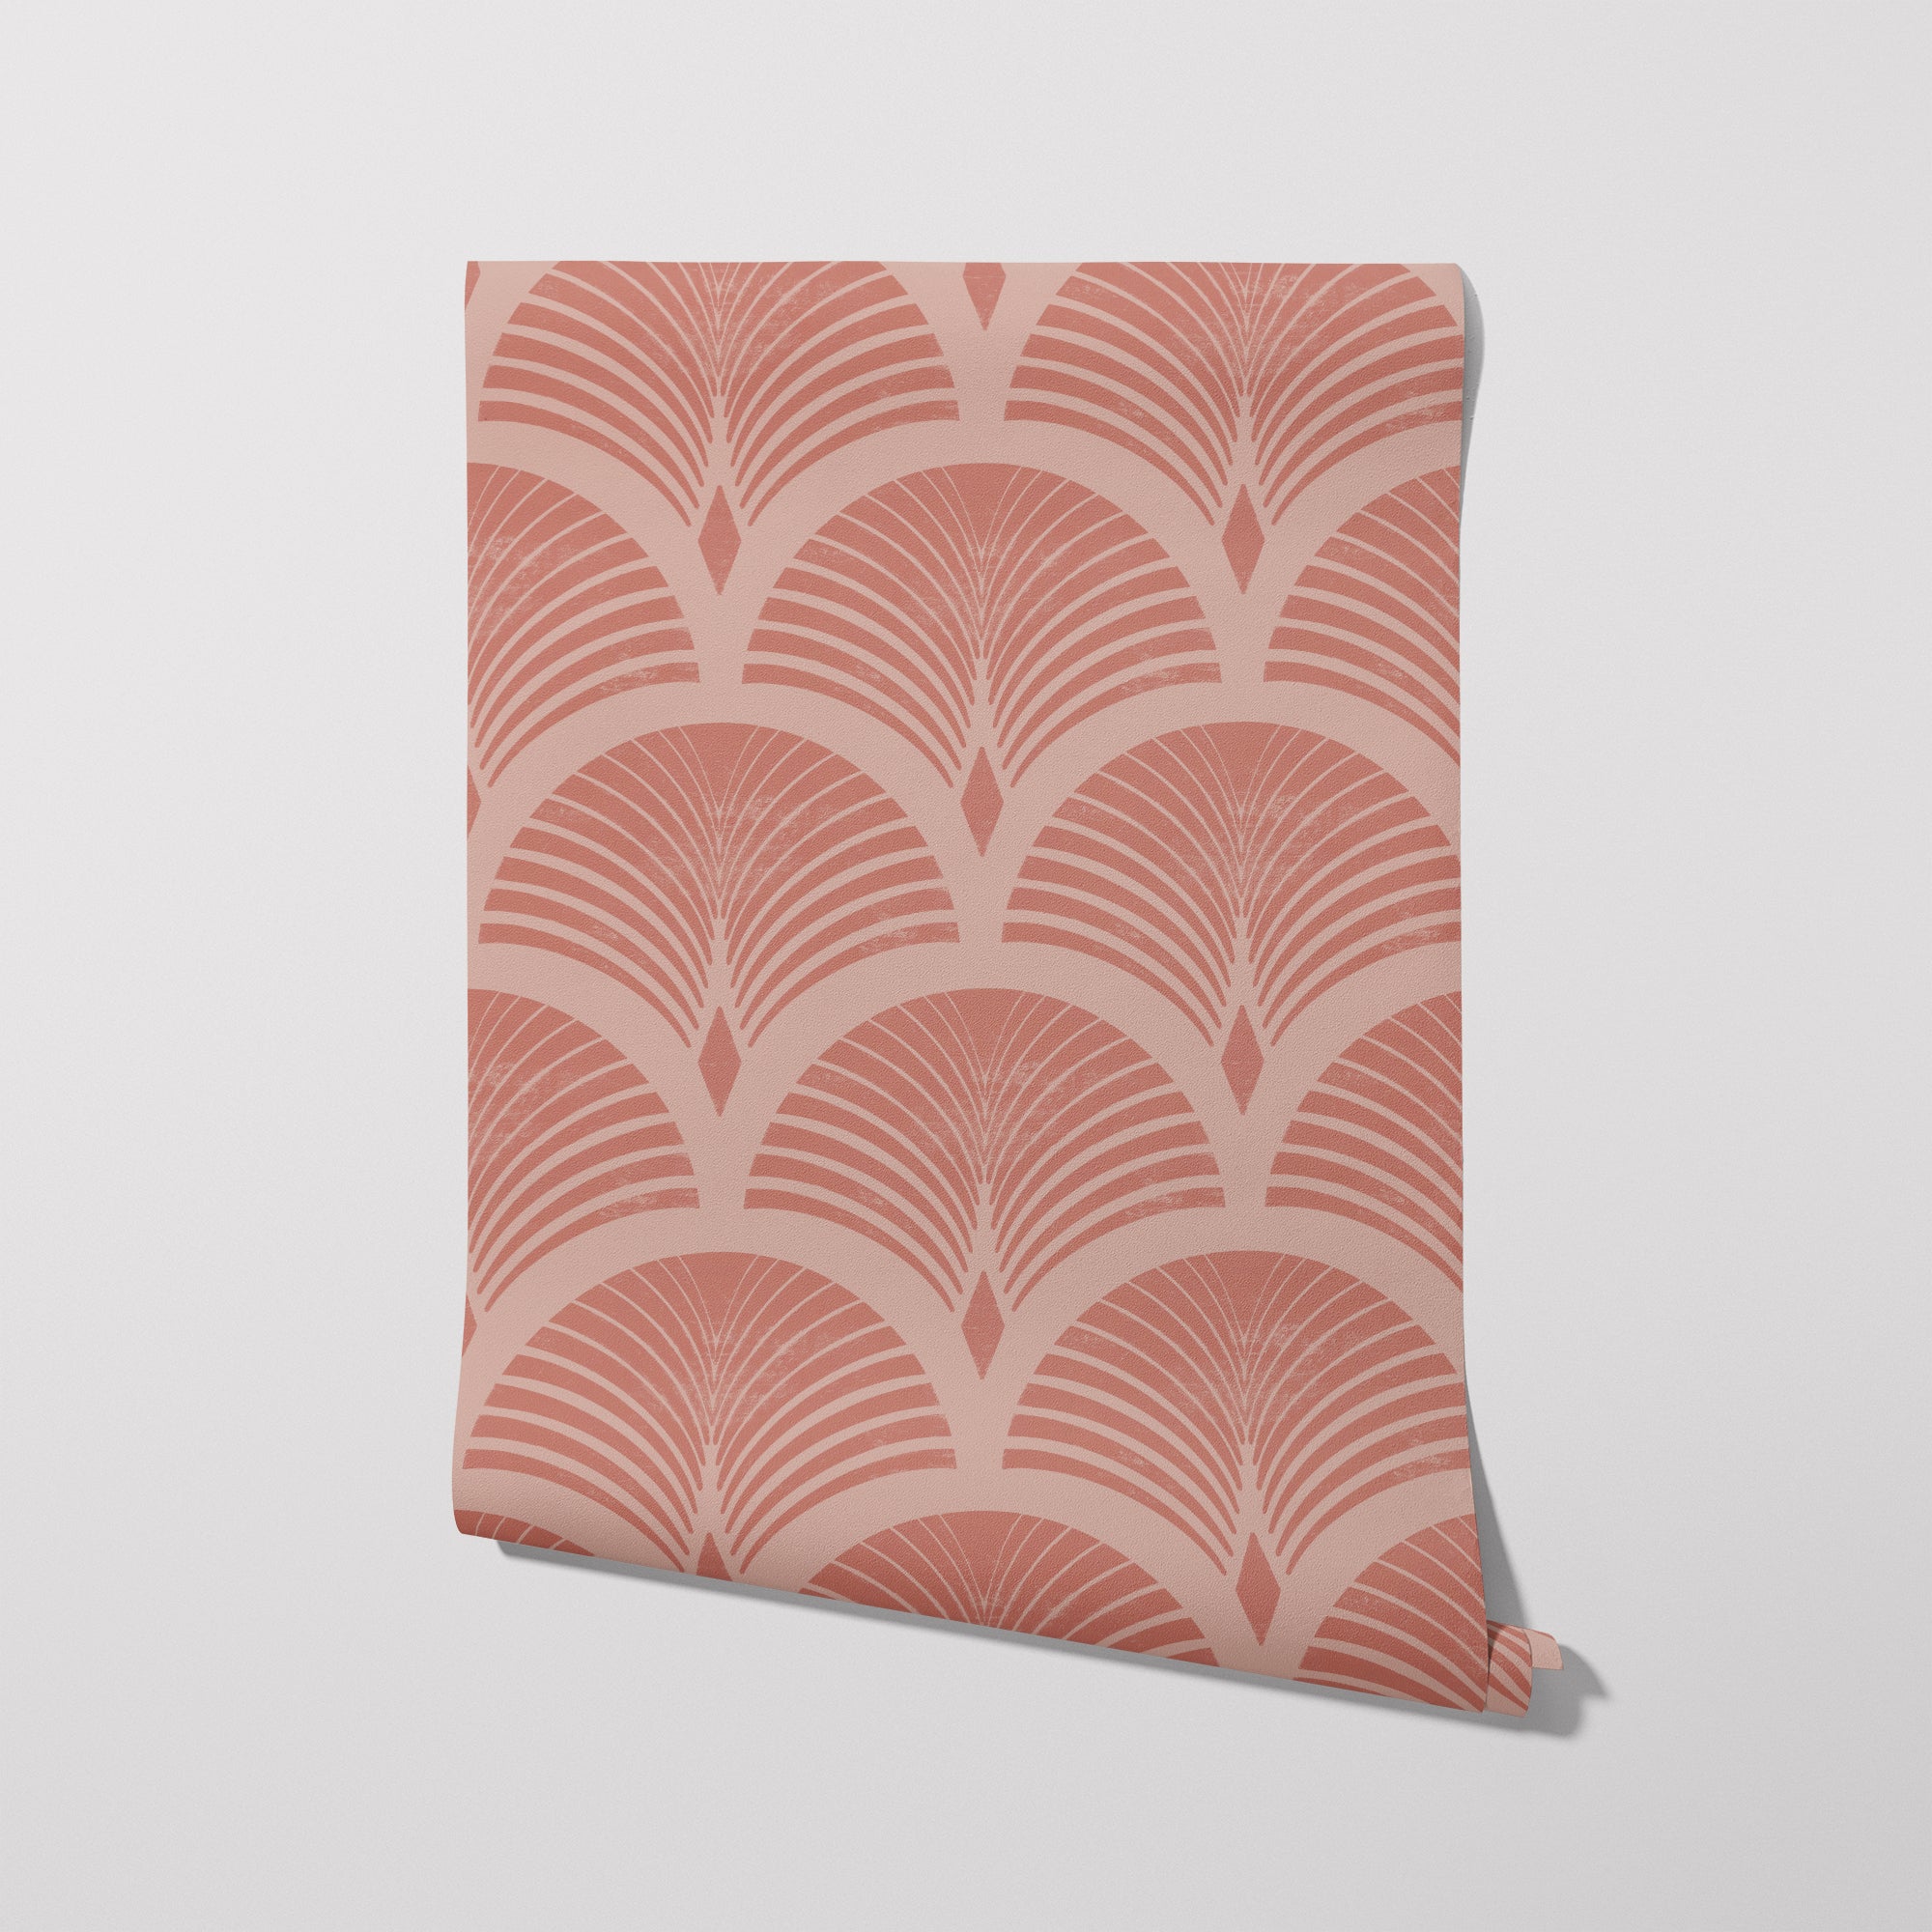 Classic Fan Wallpaper, Rose and Blush Pink